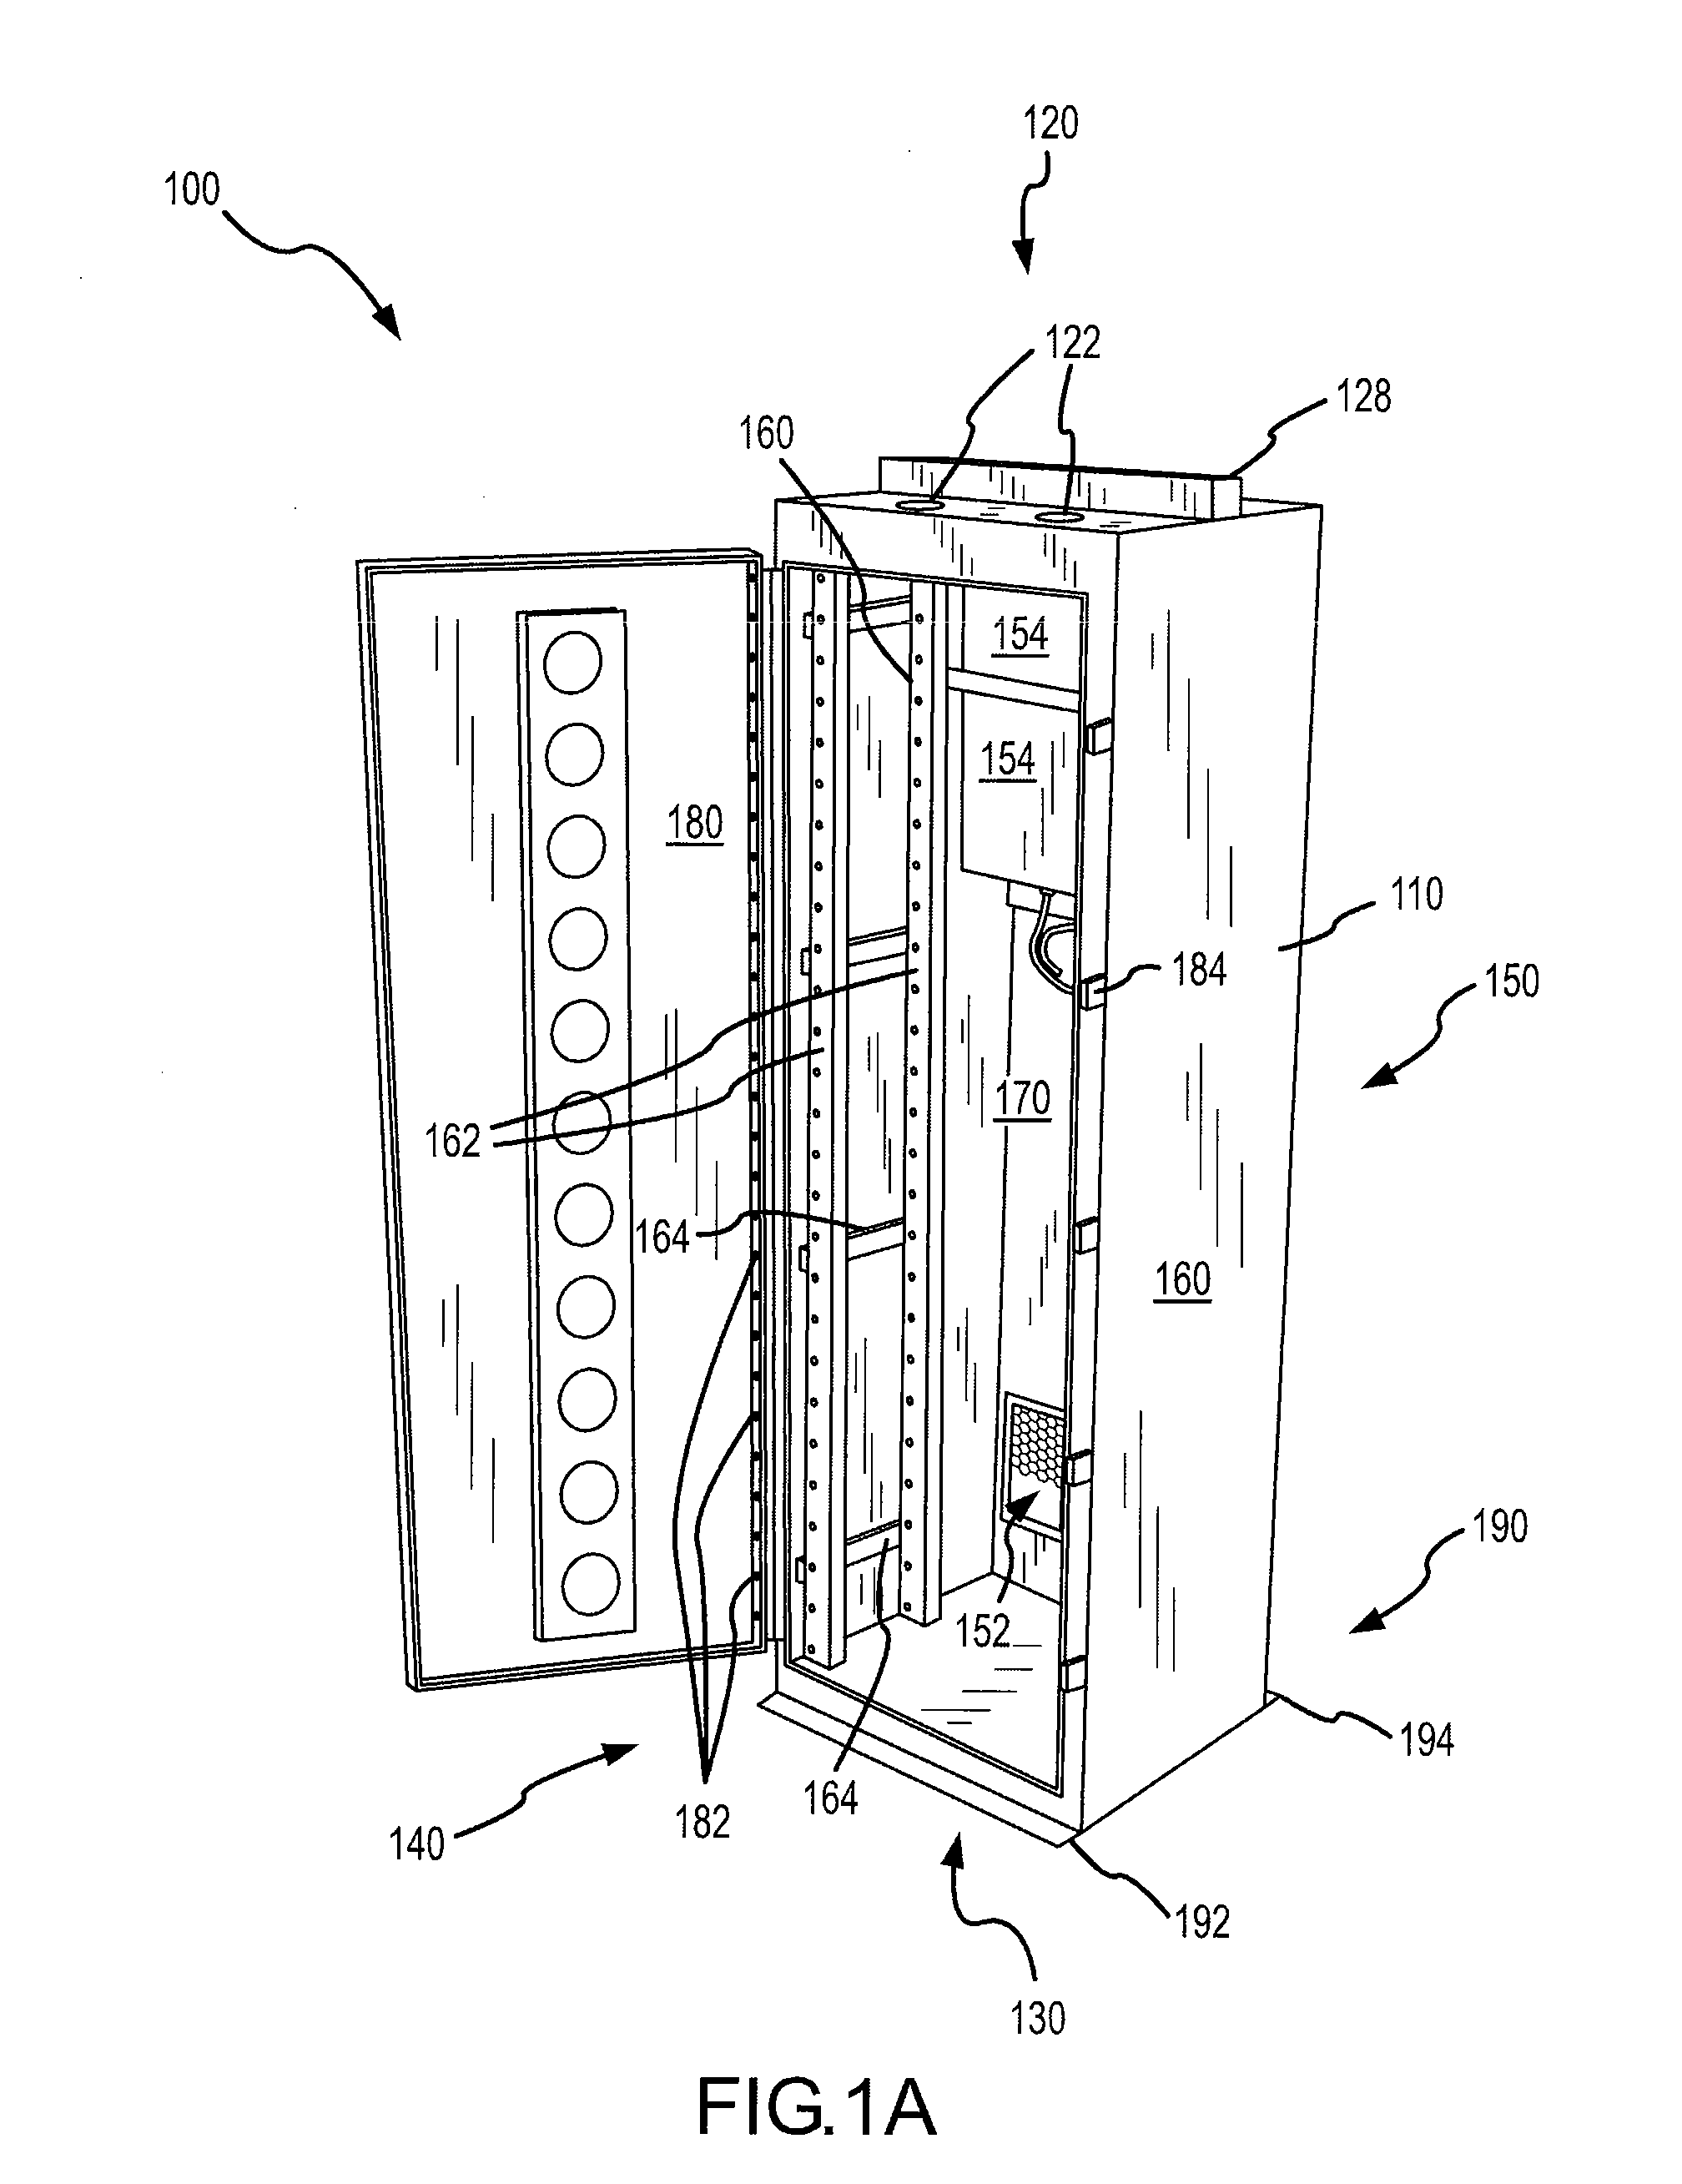 Protective telecommunications enclosure systems and methods